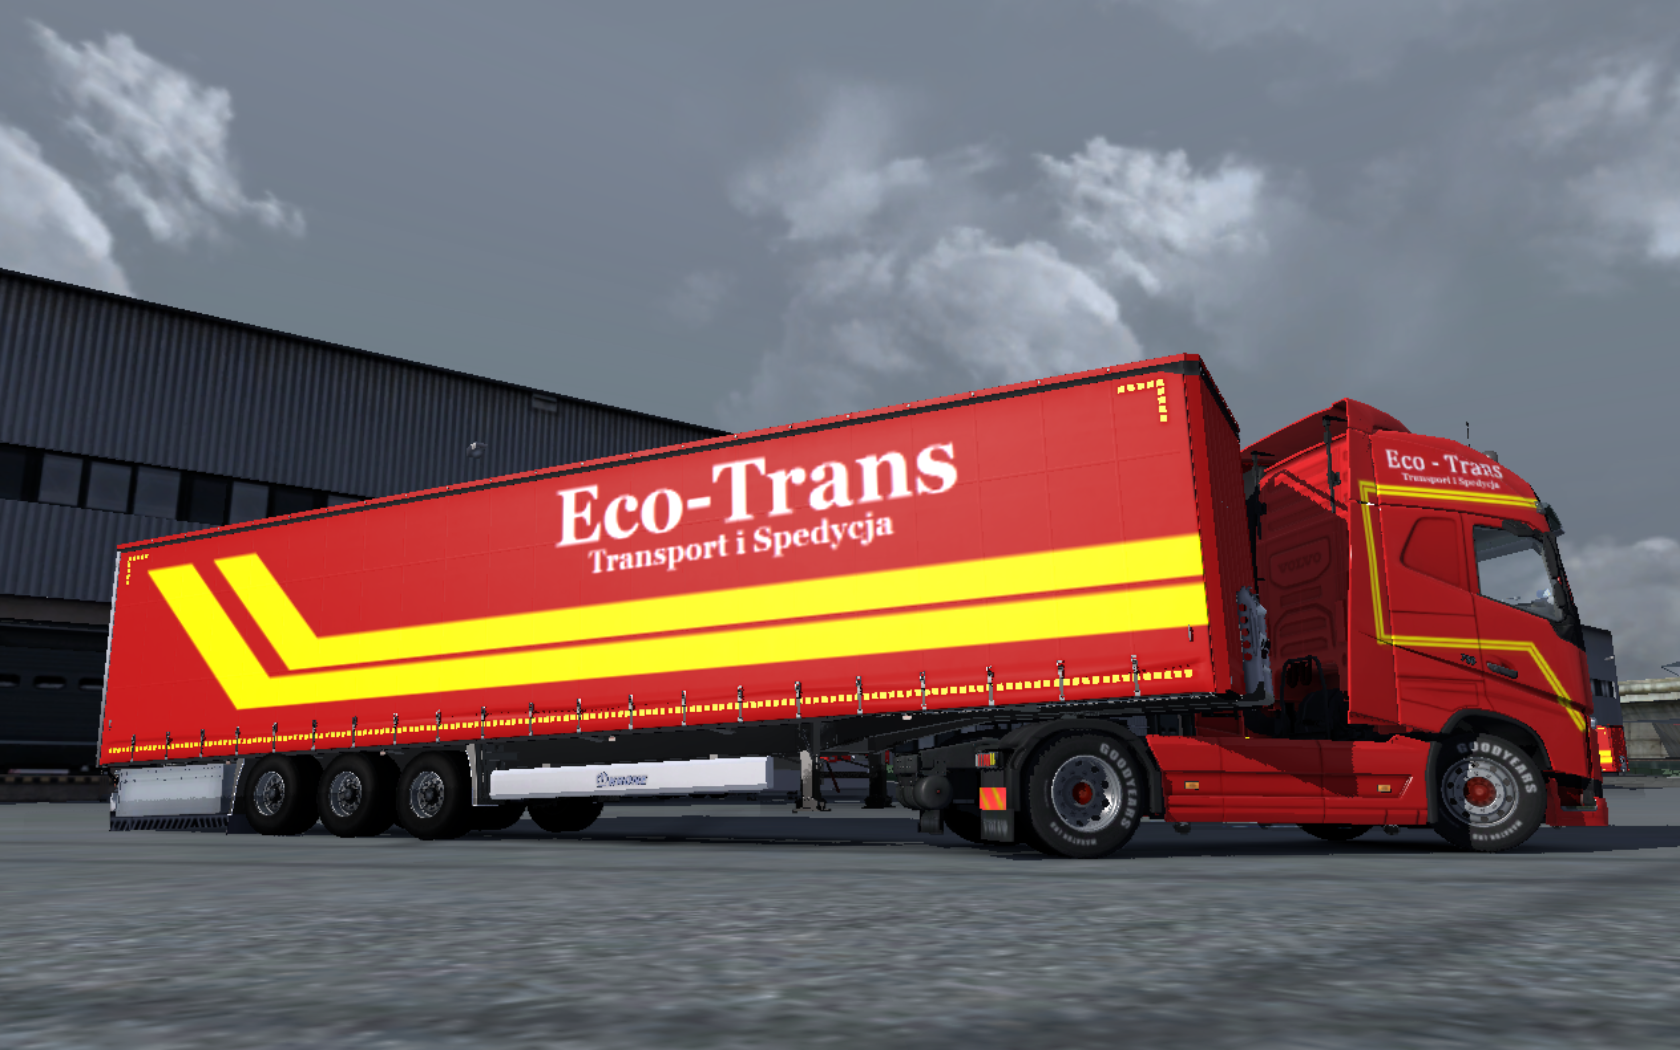 http://abload.de/img/ets2_00010isfpy.png